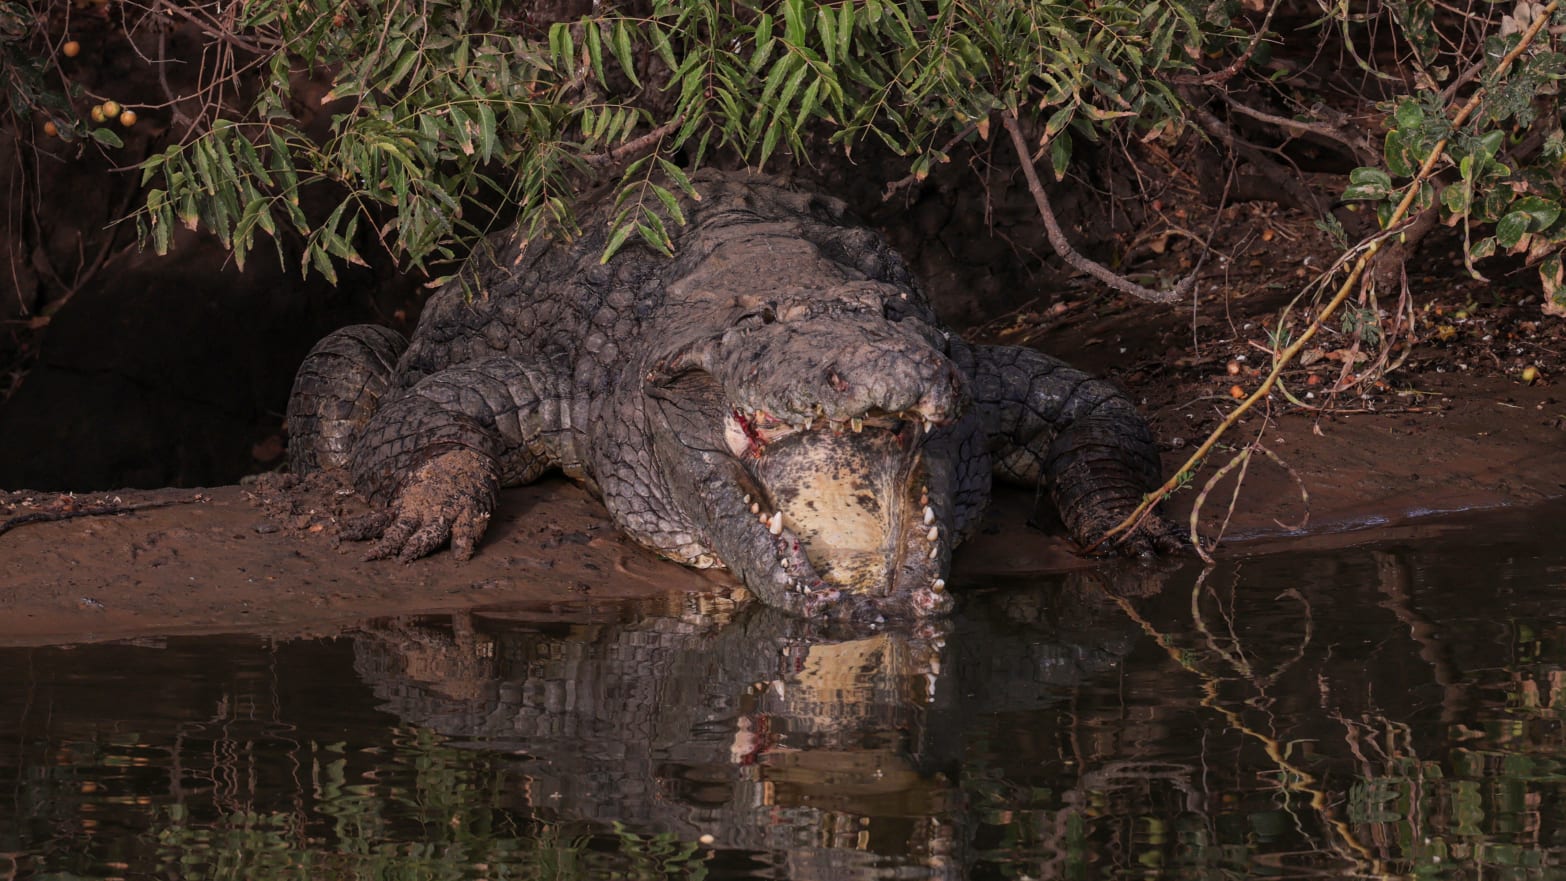 A crocodile lies with its mouth open on the edge of the water